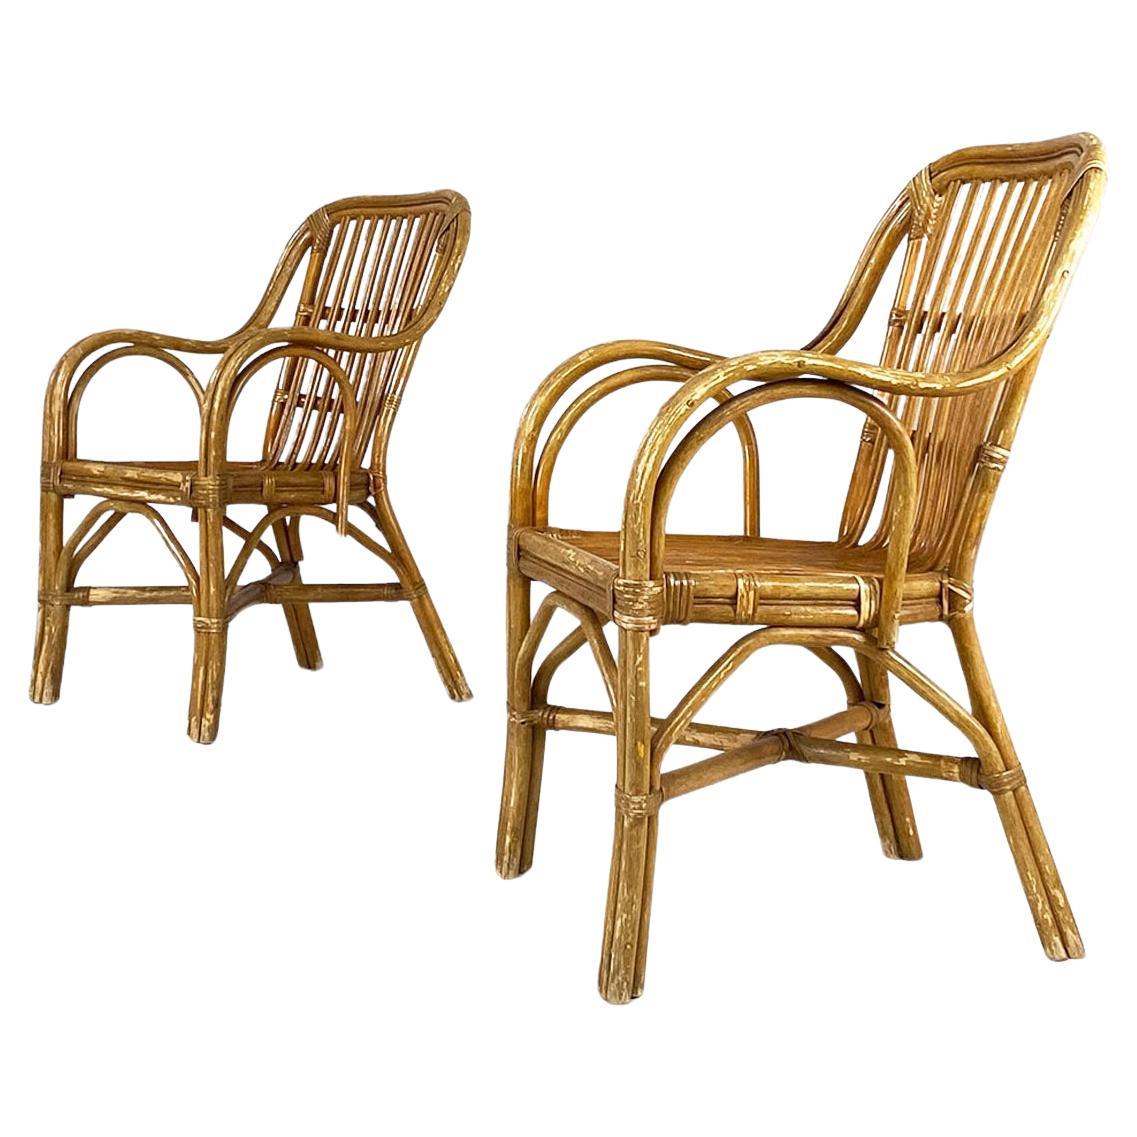 Italian mid-century modern rattan armchairs with curved armrests, 1960s For Sale